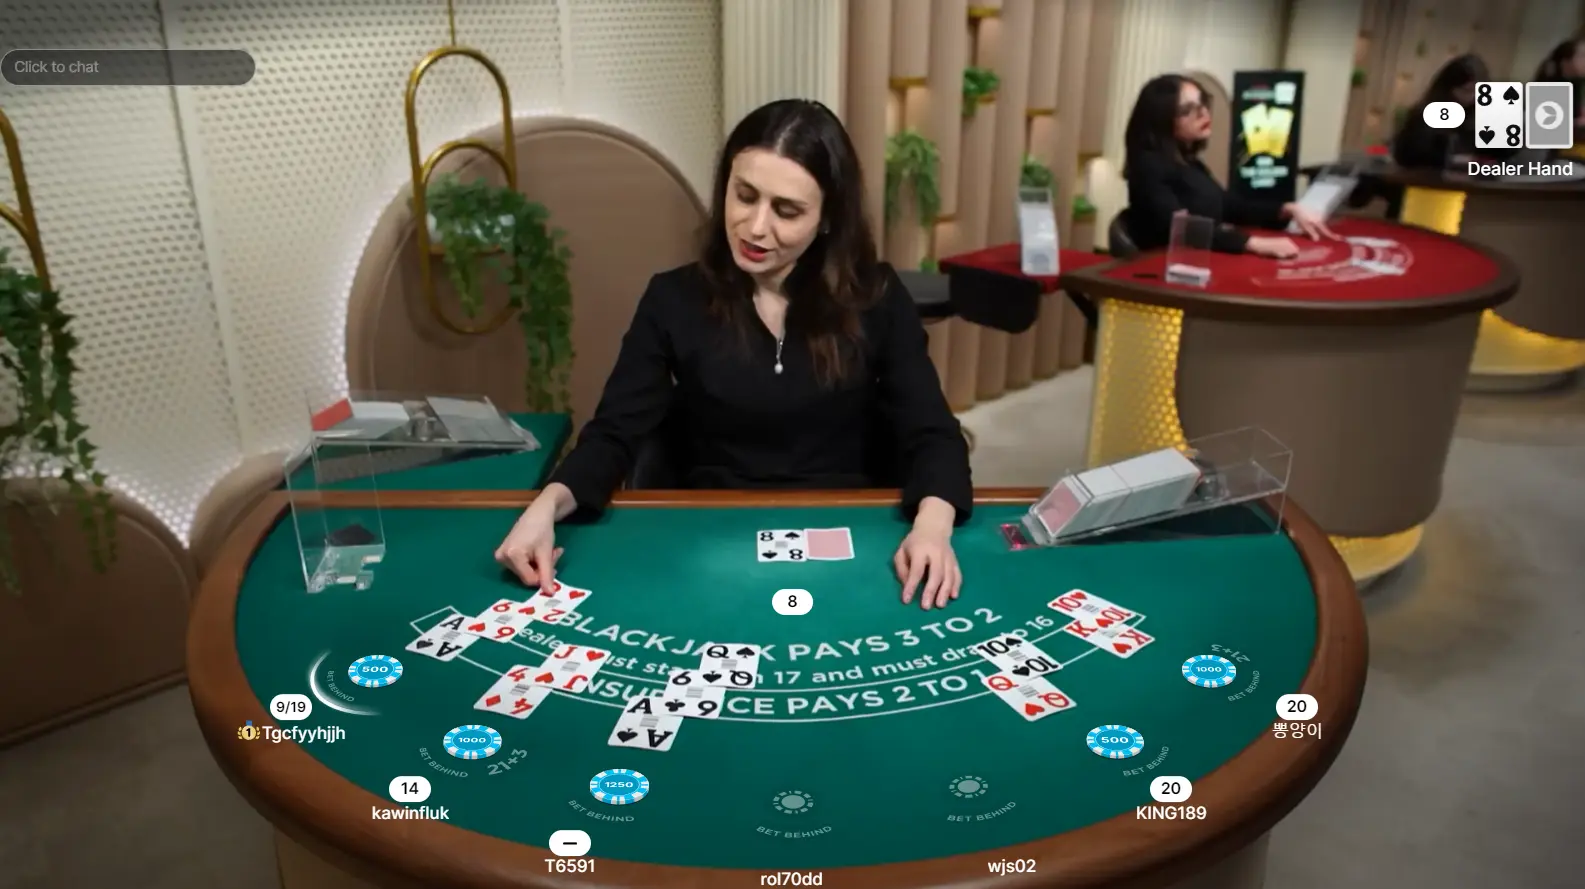 live dealer blackjack succeeds in blending the sophistication of luxurious casinos with remote accessibility